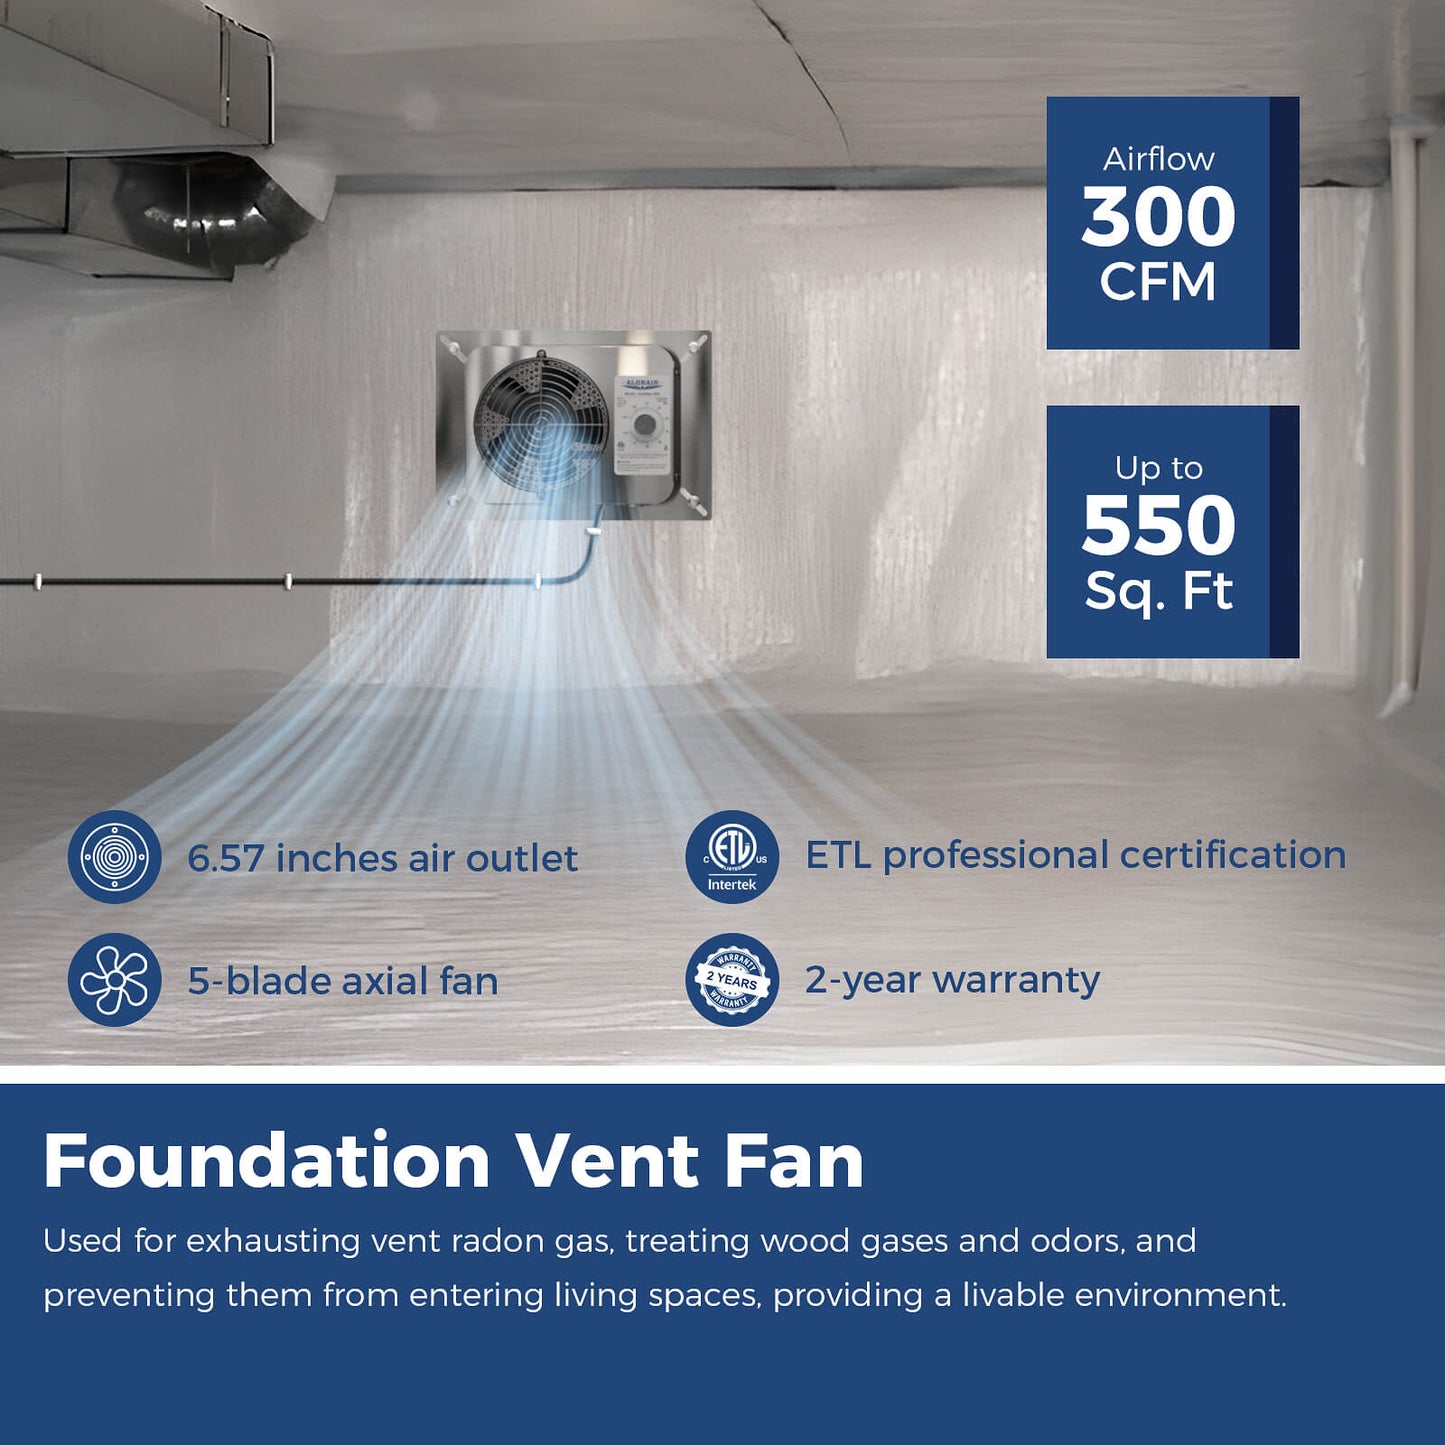 AlorAir 300CFM Stainless Steel Crawl Space Fan IP55 Rated Crawl Space Ventilation Fan with Thermostat, Built-In Isolation Net 6.7 Inch Foundation Vent Fan for Crawl Space, Basement, Garage, Attic AlorAir